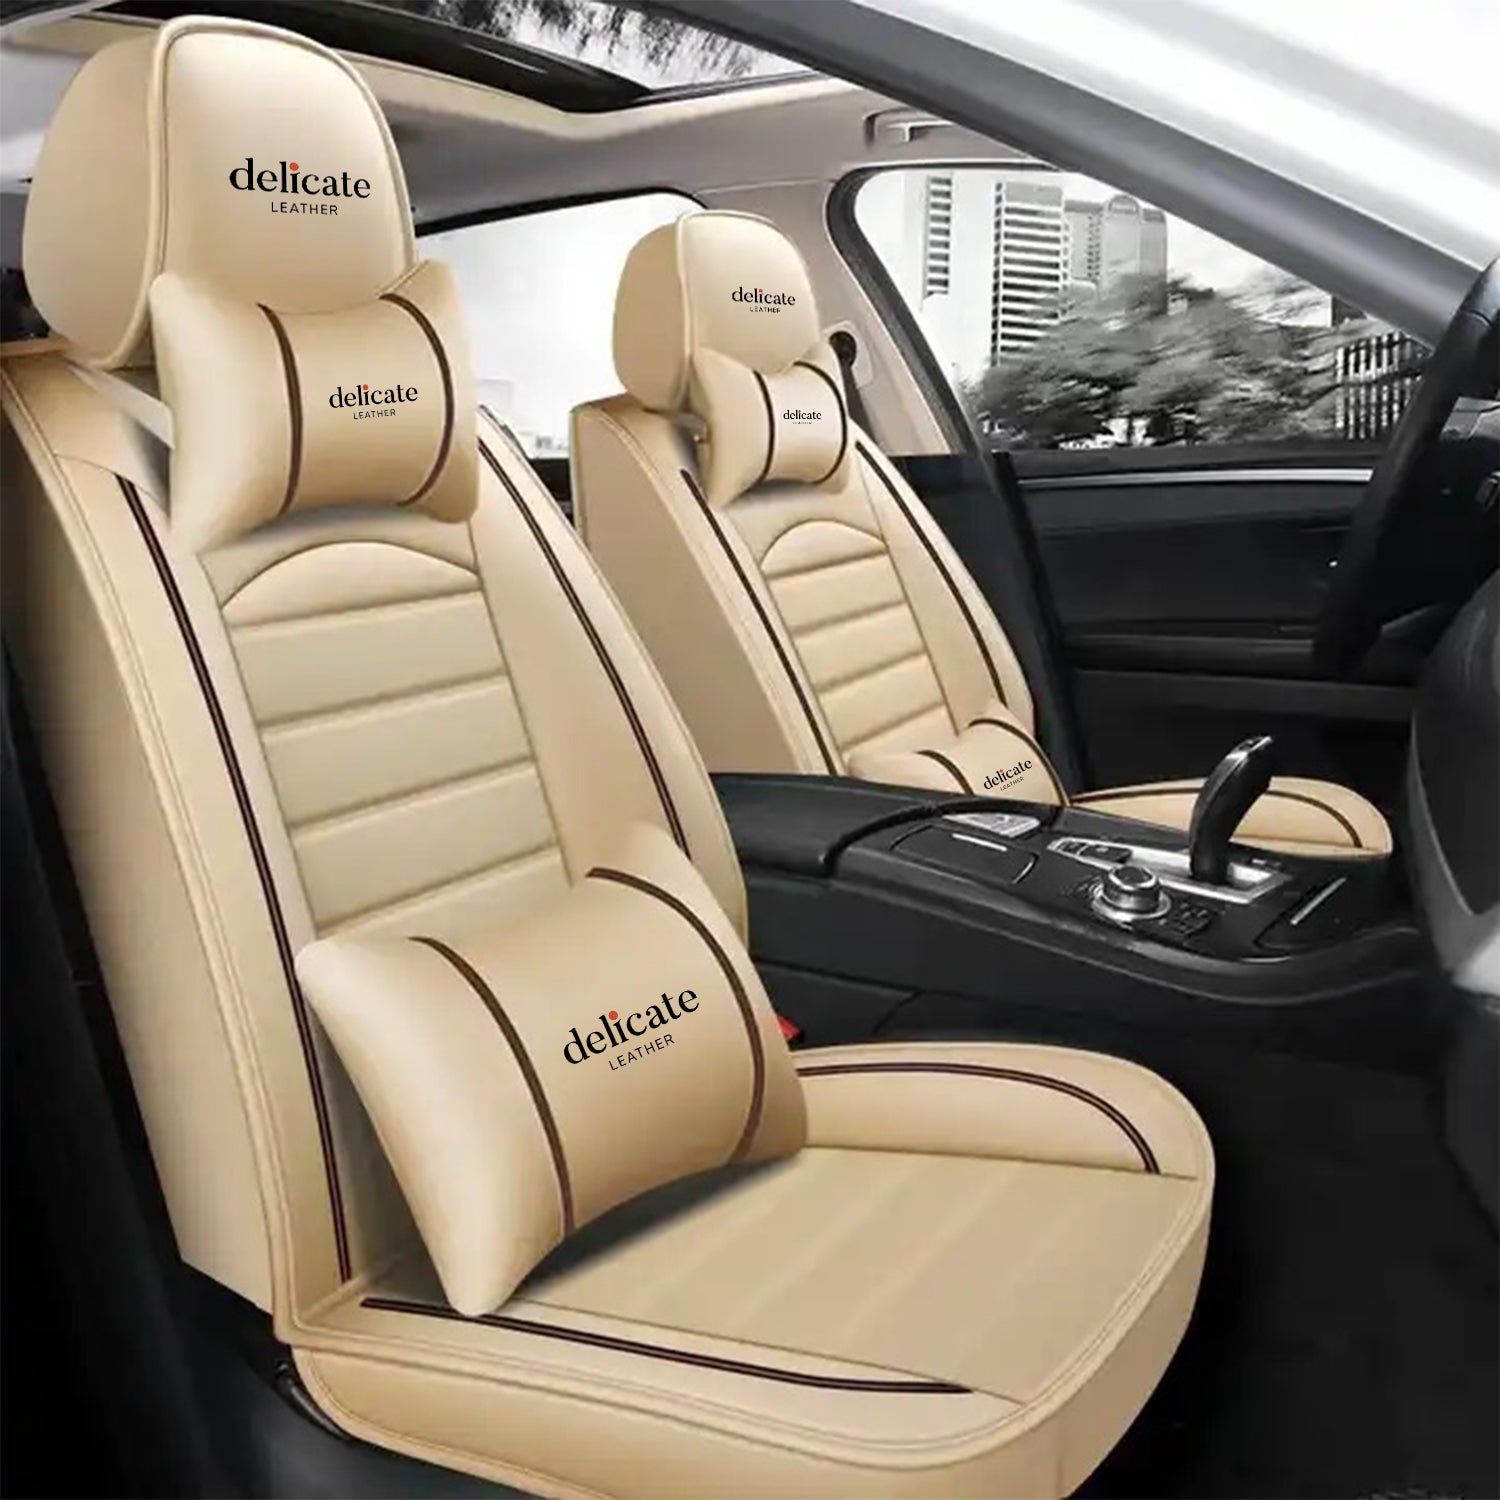 Delicate Leather Car Seat Cover Luxury Leather Car Seat Cover Custom U